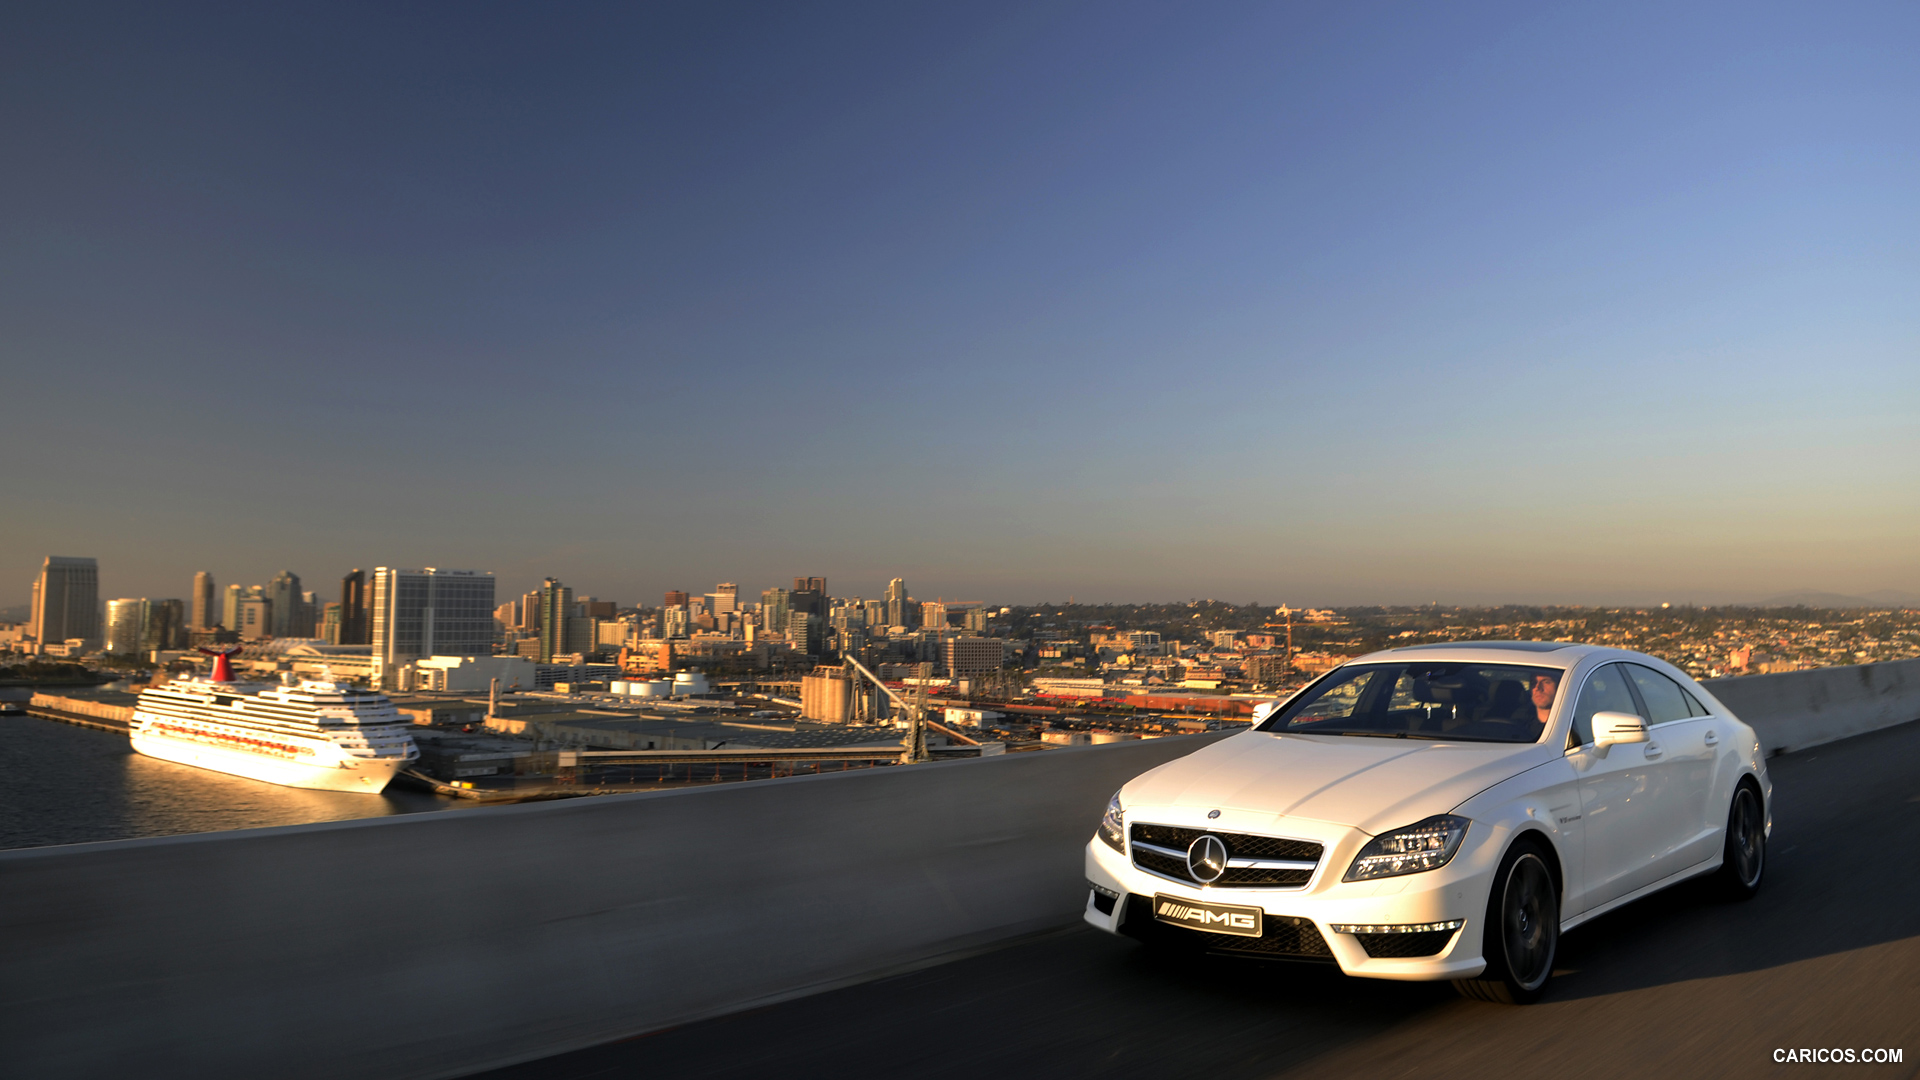 Mercedes-Benz CLS63 AMG (2012) US-Version - Diamond White - Front , #10 of 100